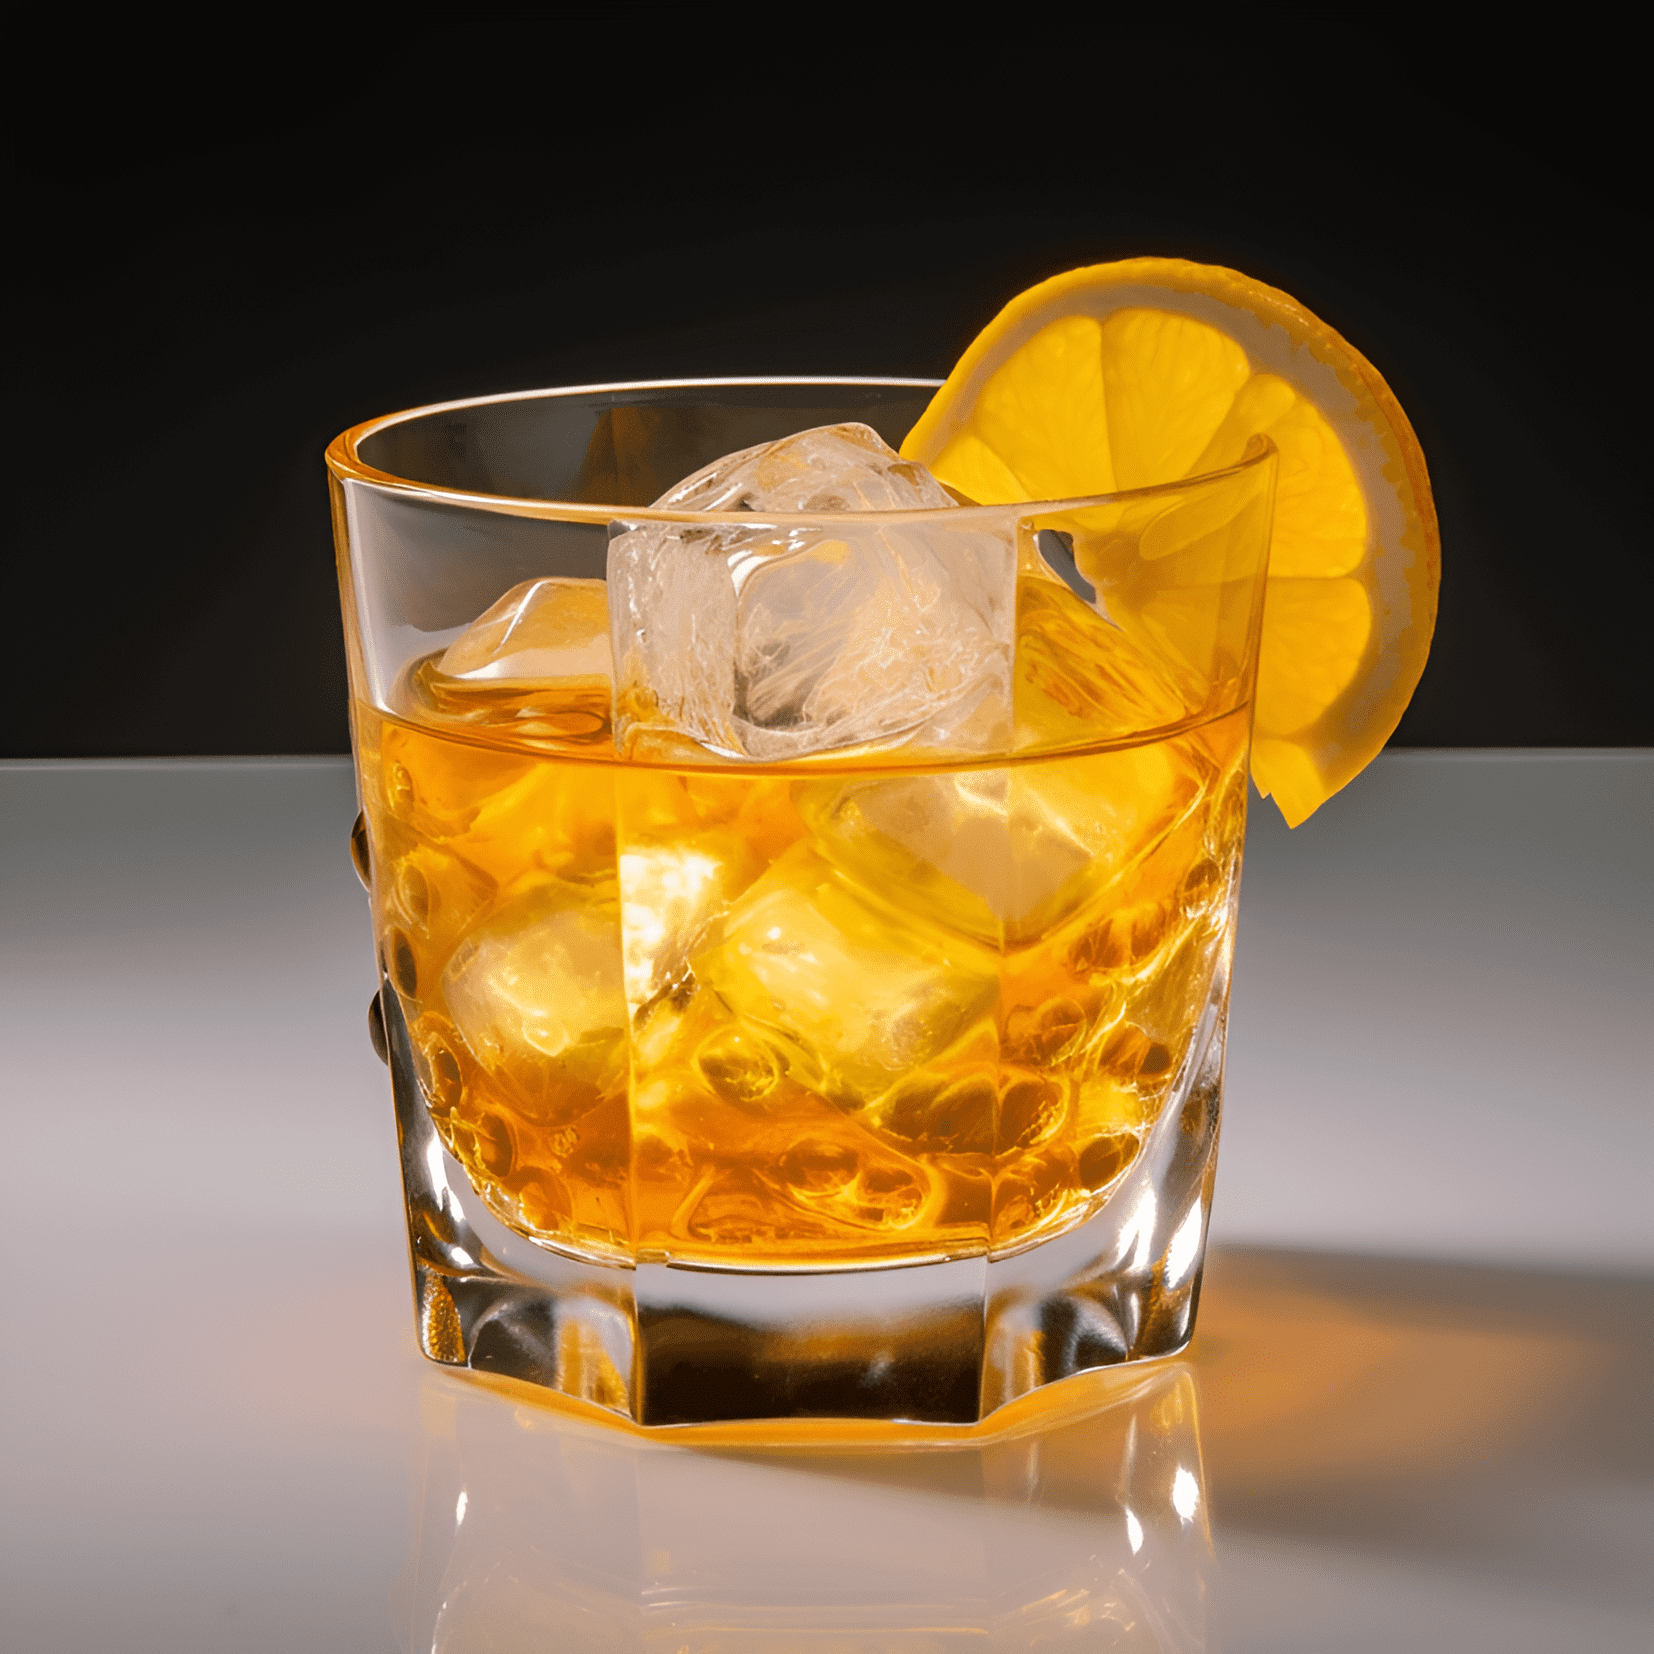 Mark Twain Cocktail Recipe - The Mark Twain cocktail has a well-balanced, slightly sweet and sour taste with a strong whiskey base. The lemon juice adds a refreshing citrus note, while the simple syrup provides a hint of sweetness. The bitters give it a complex, aromatic finish.